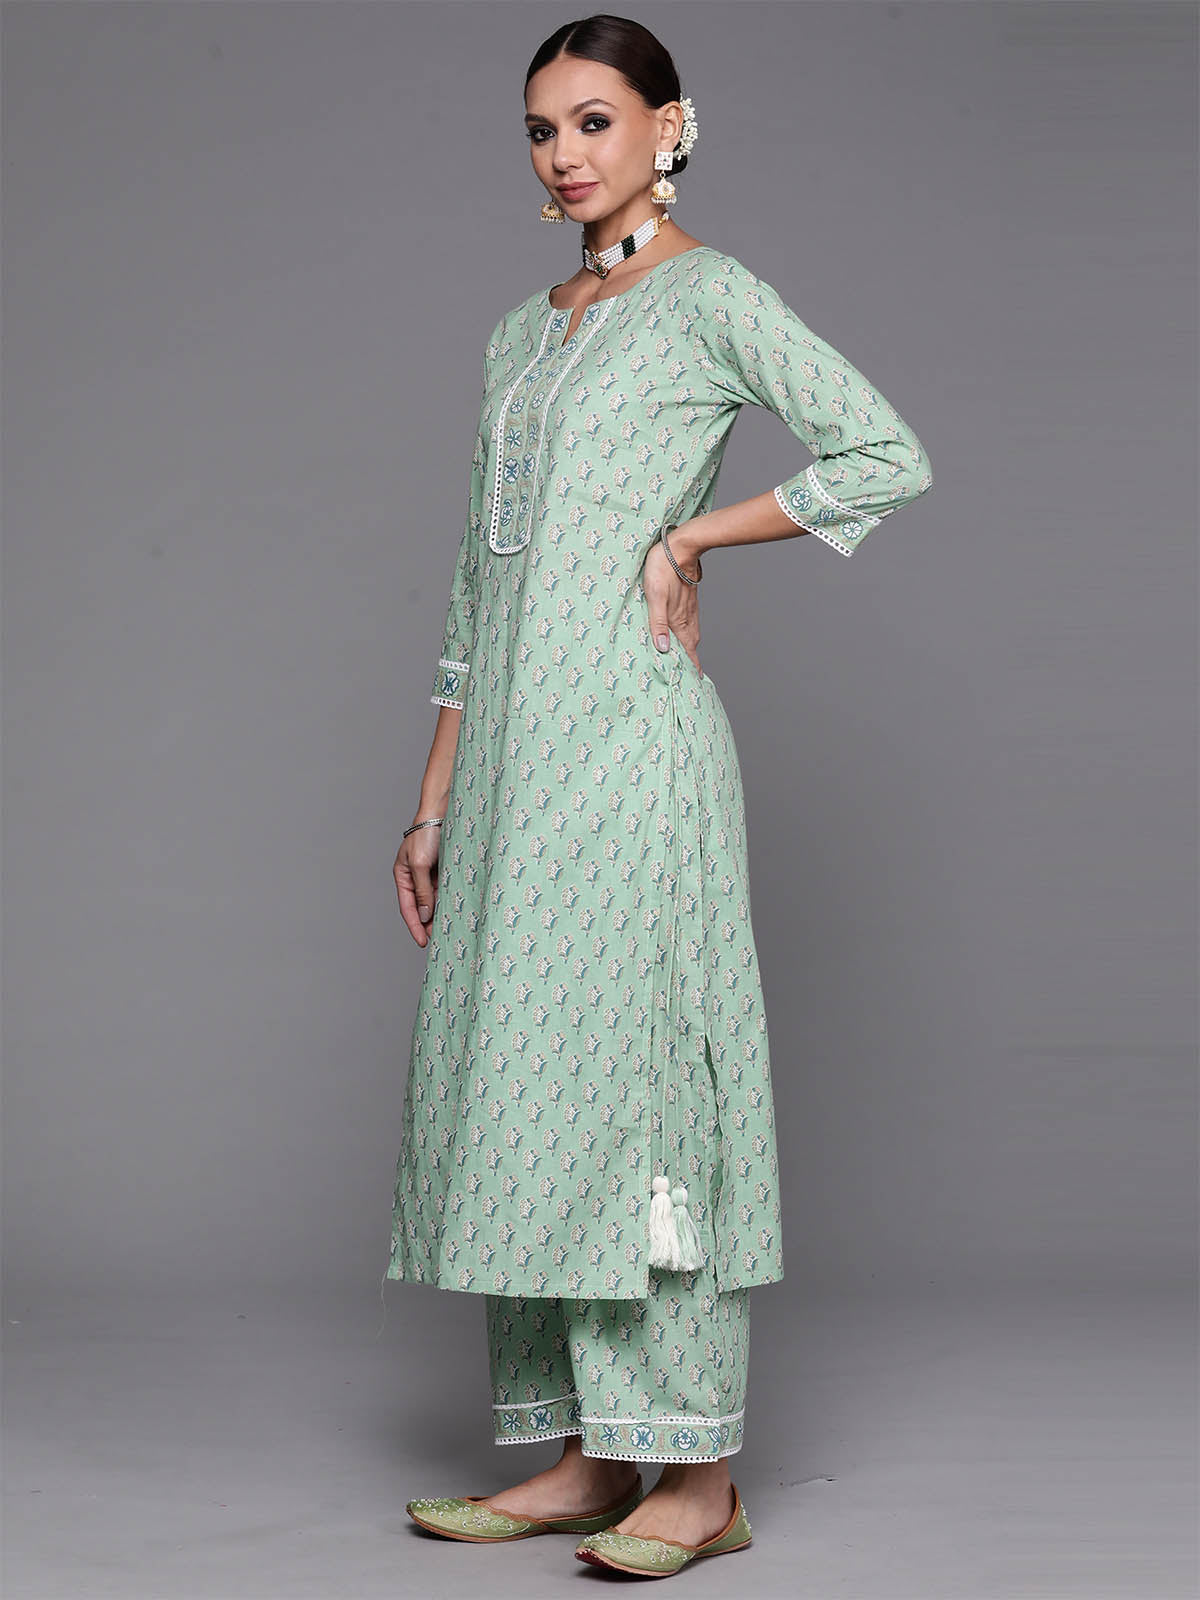 Women's Sea Green Floral Printed Straight Kurta Palazzzo With Dupatta Set - Odette